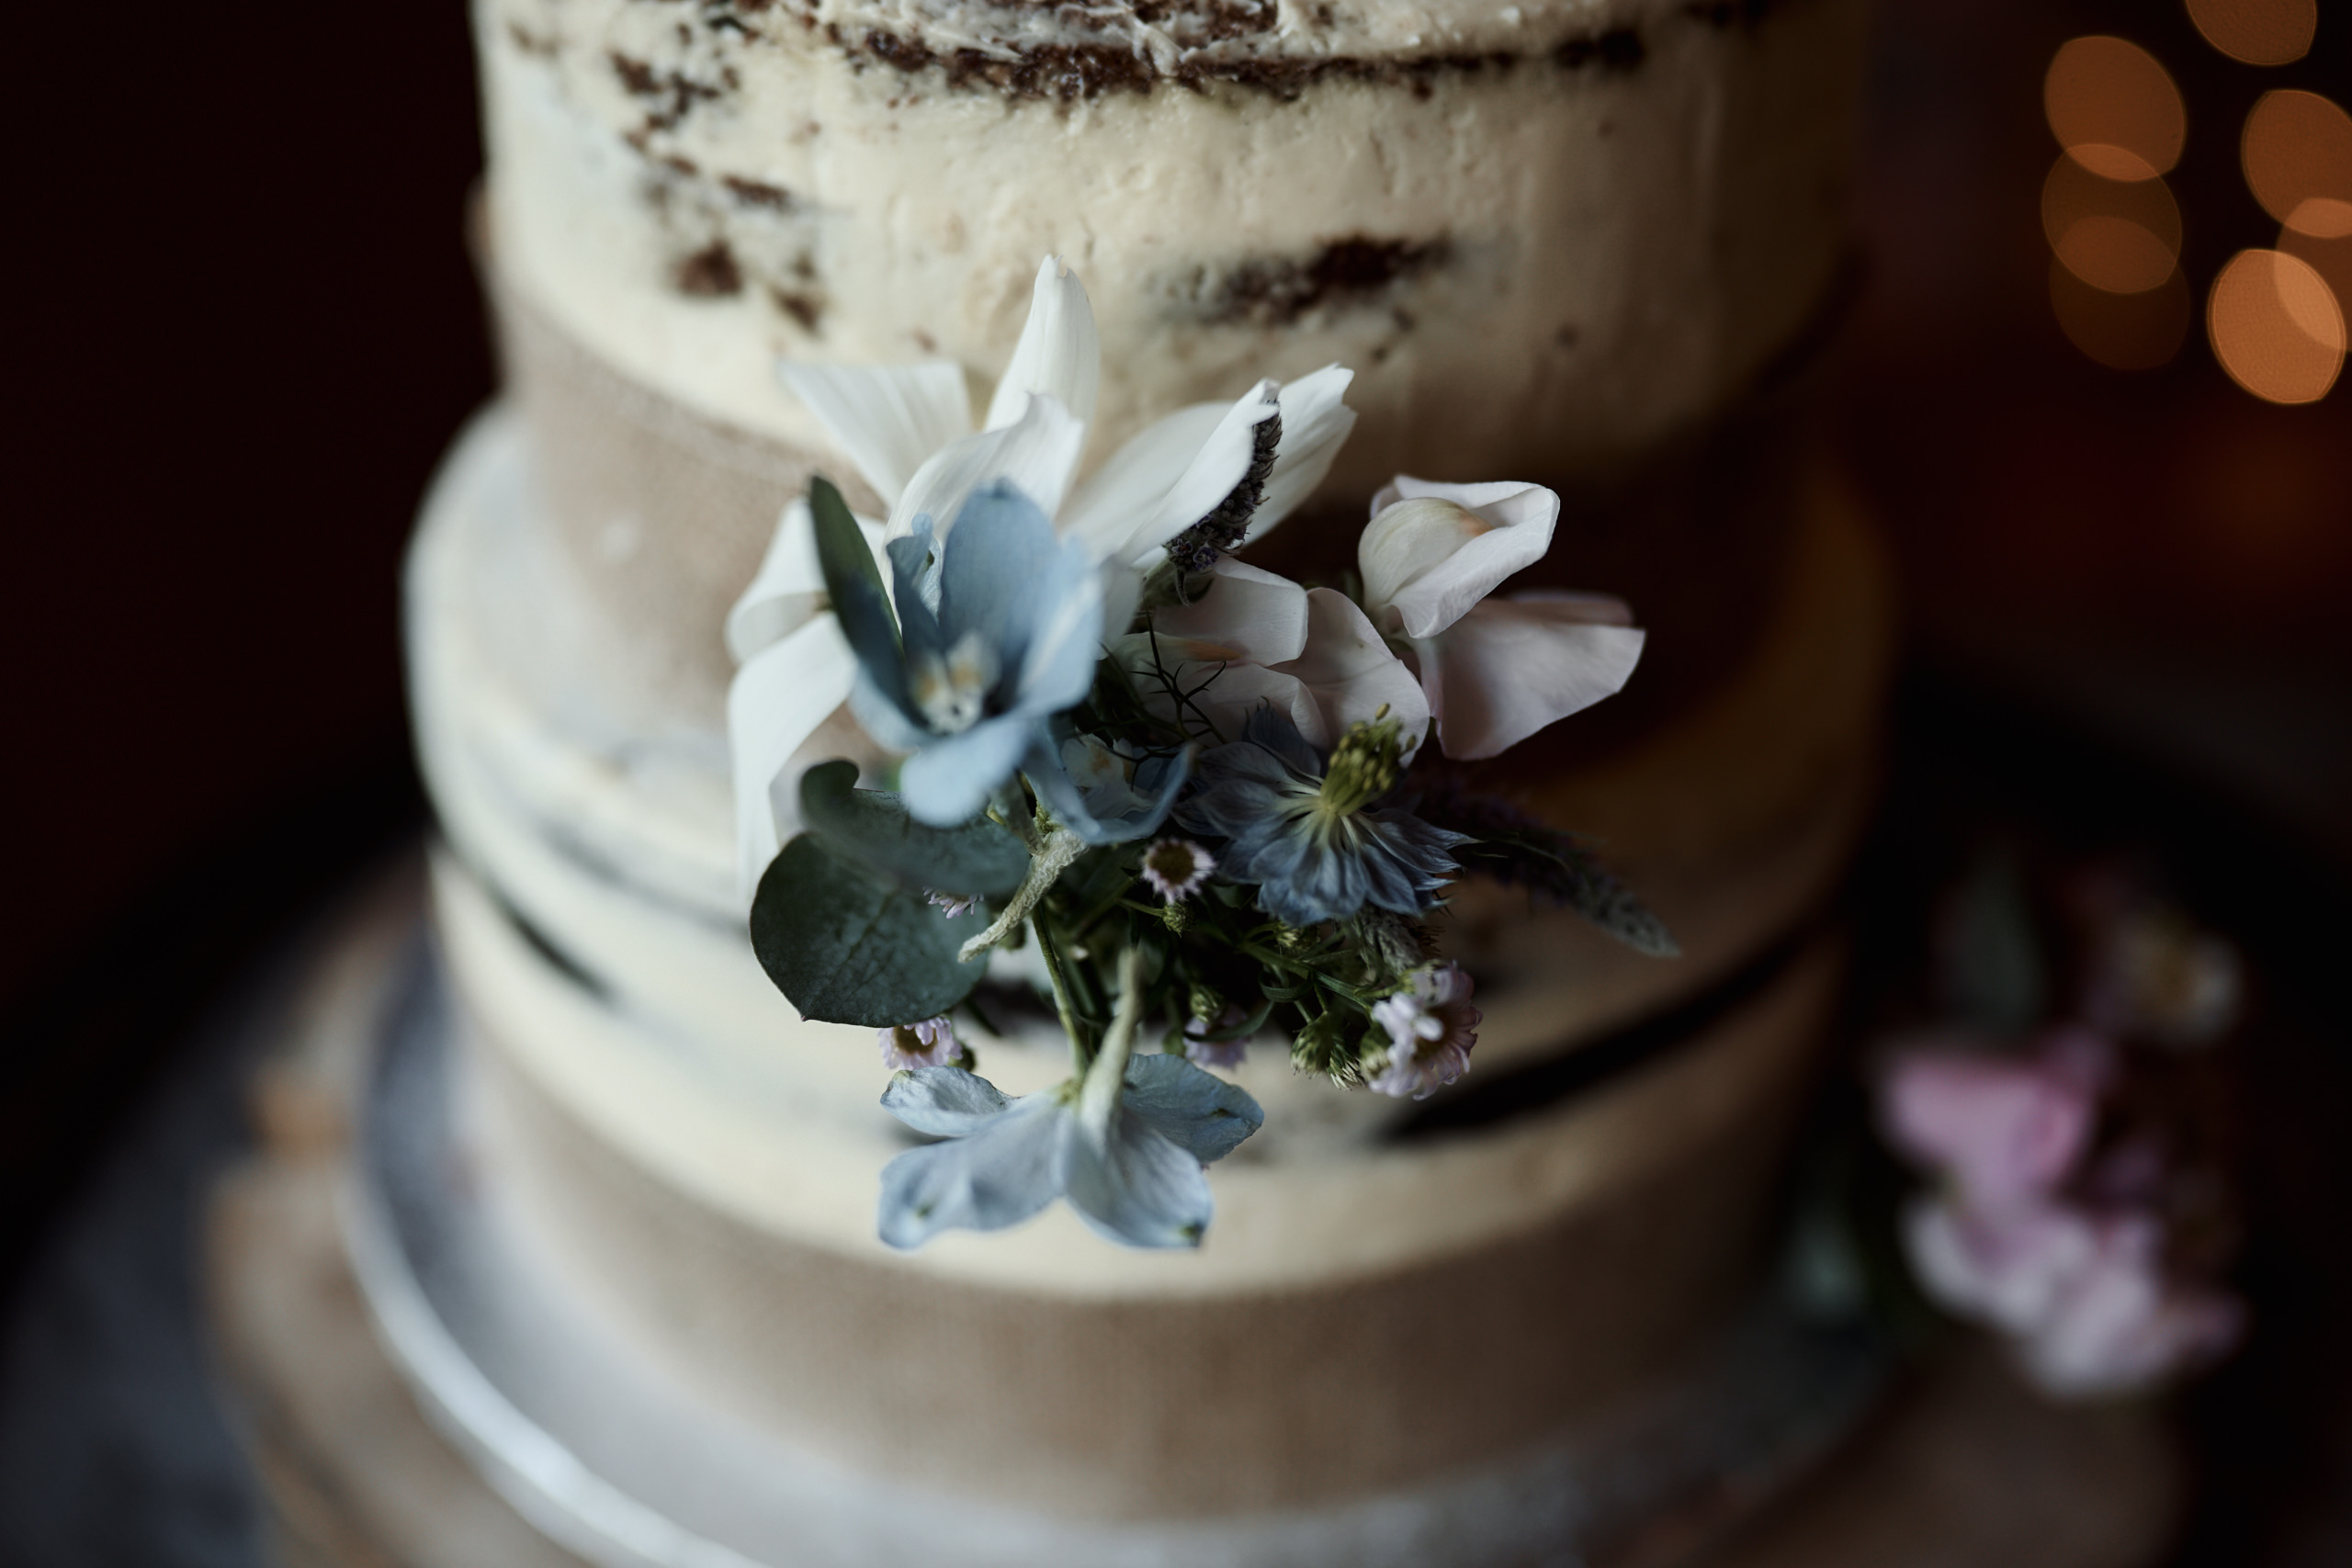 A three-layer wedding cake topped with flowers.